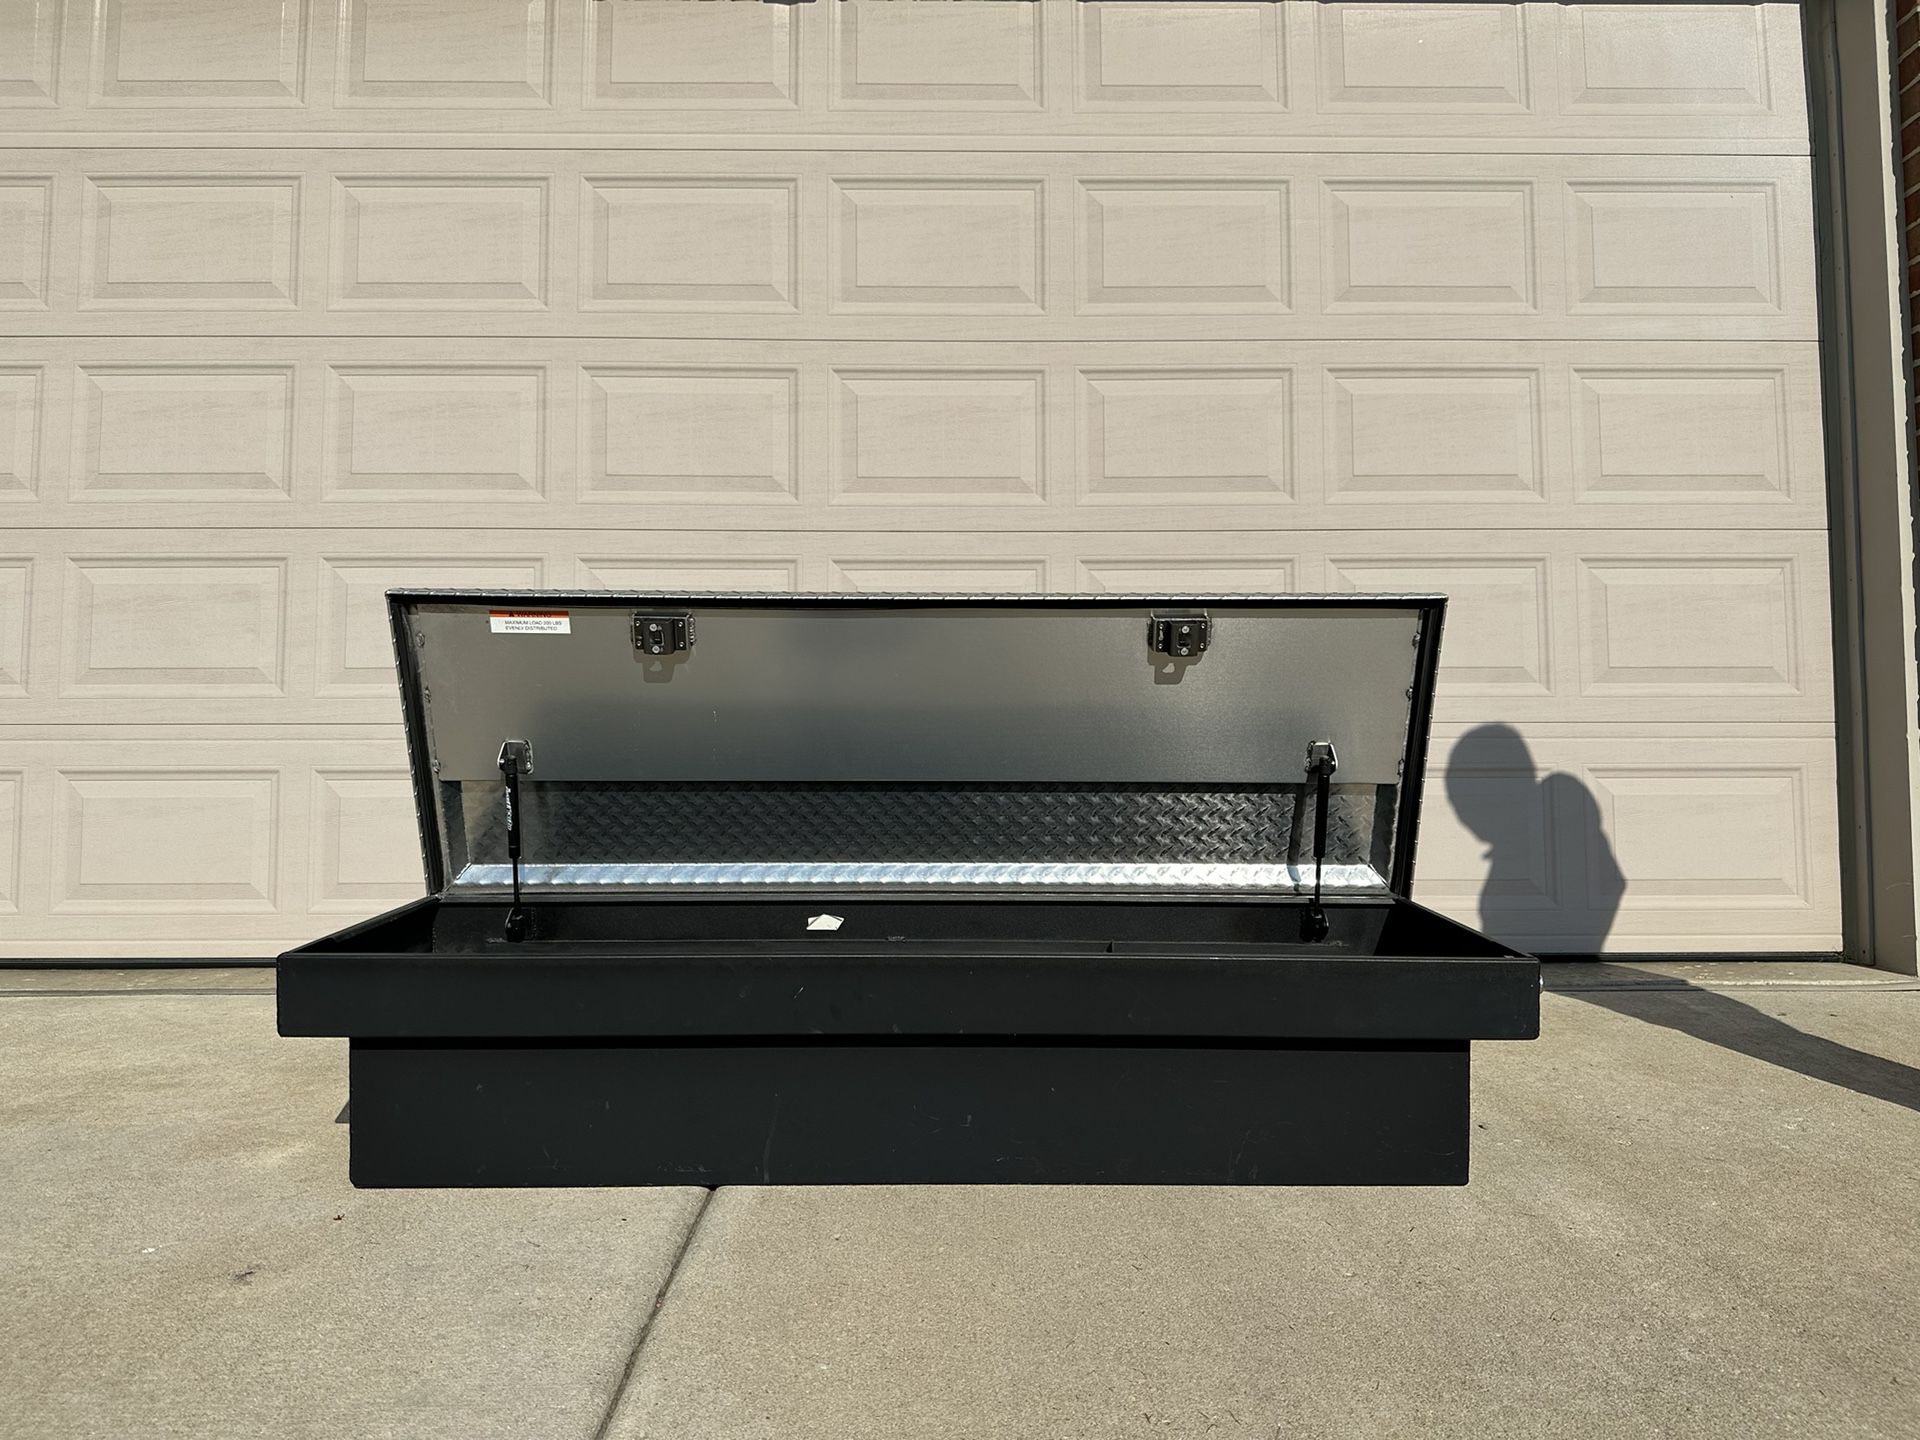 Toyota Tacoma Truck Bed Toolbox